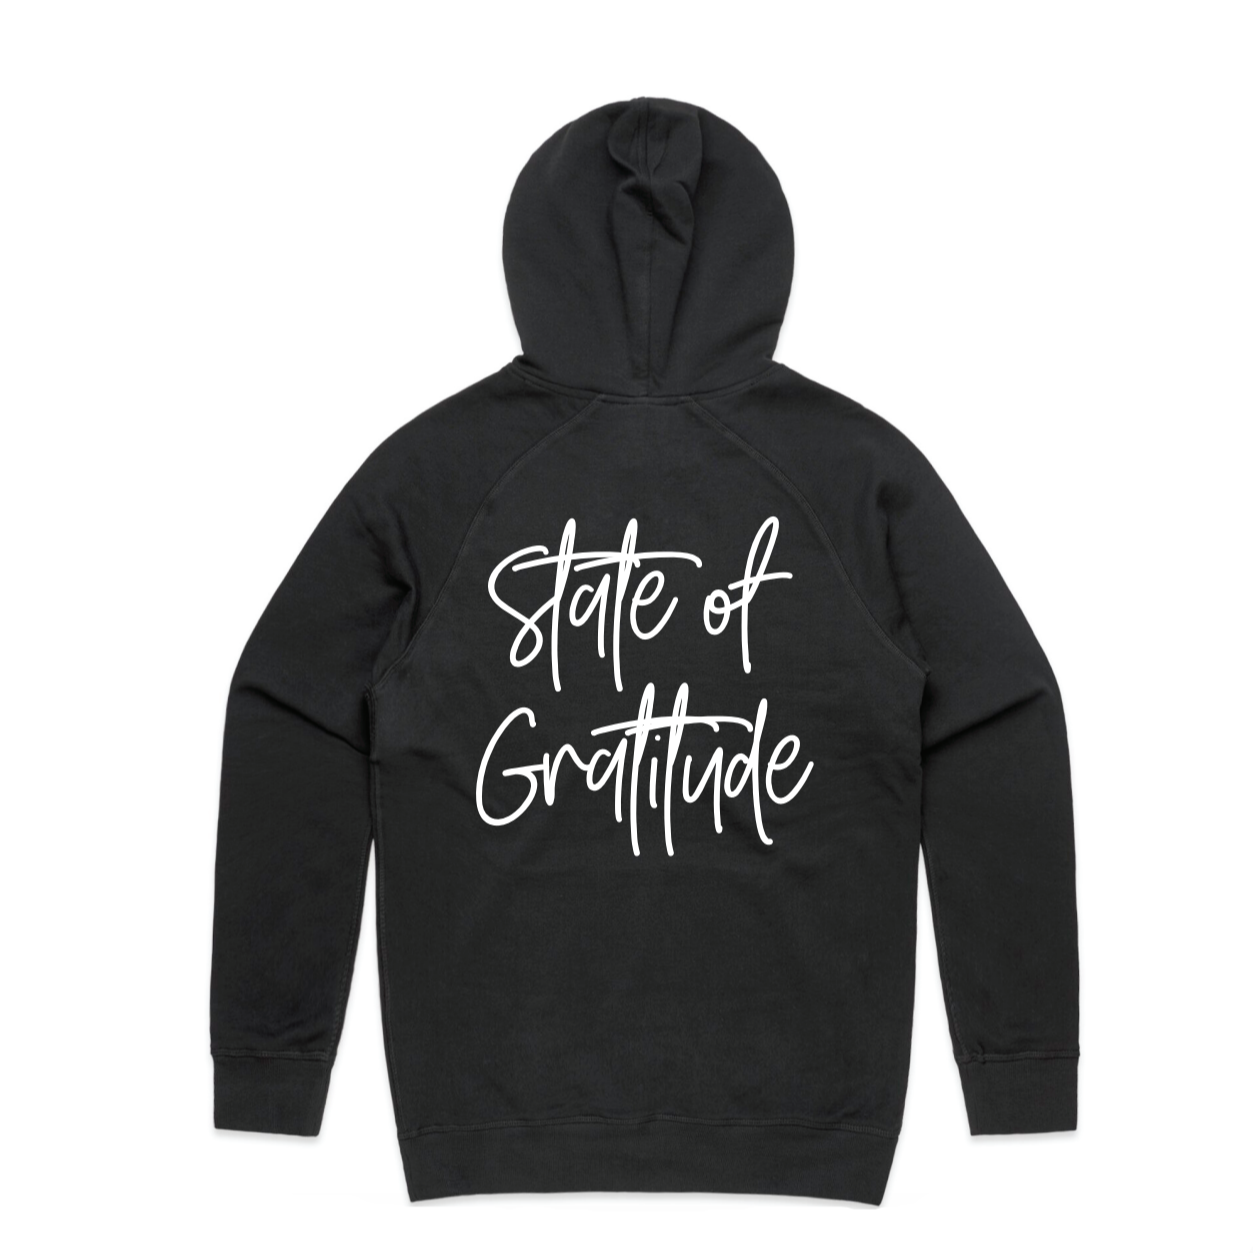 State of Gratitude Hoodie Long Sleeve Sweater with Front Pouch | Grateful synonym | Appreciation synonym | Gratitude synonym | Thankfulness | Define grateful | Grateful meaning